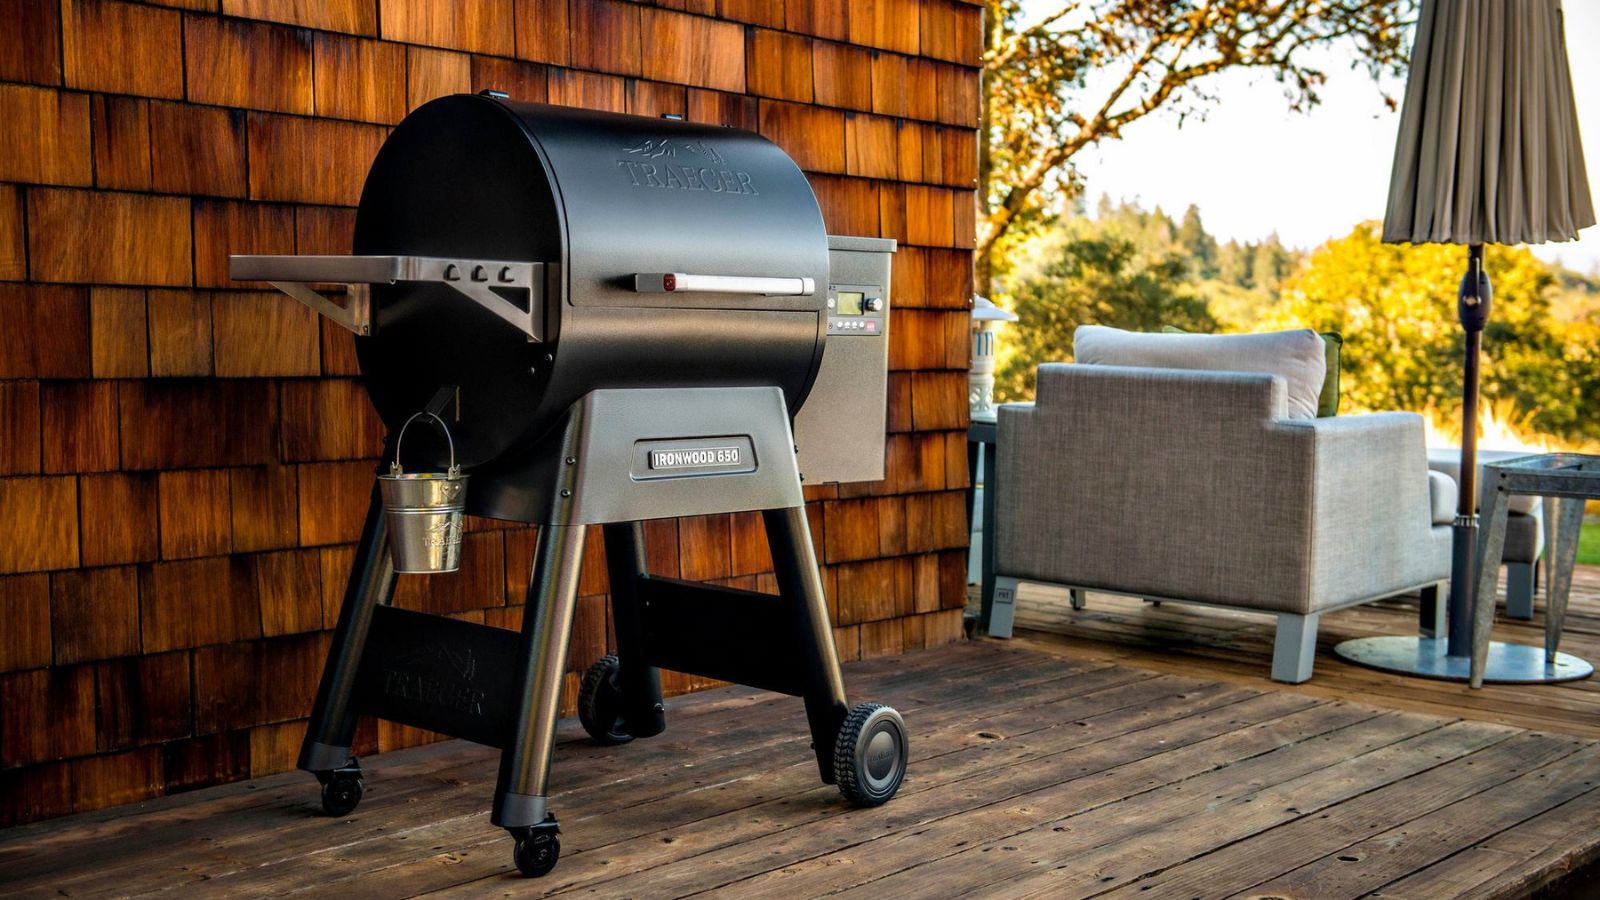 2 quick ways to clean your grill without a grill brush - CNET